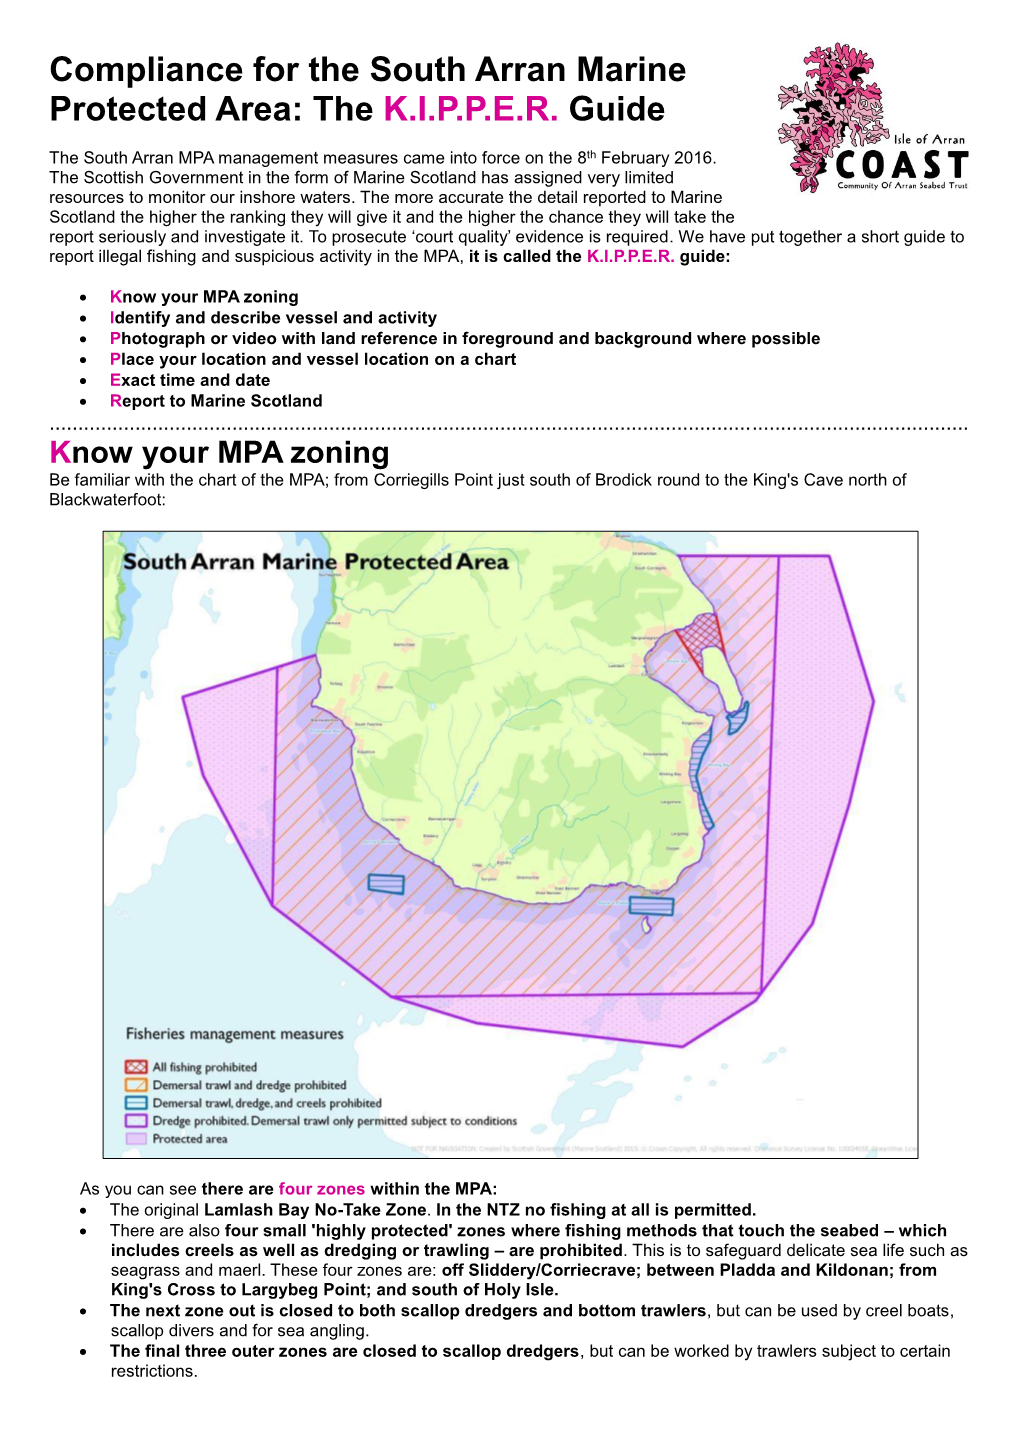 Compliance for the South Arran Marine Protected Area: the K.I.P.P.E.R